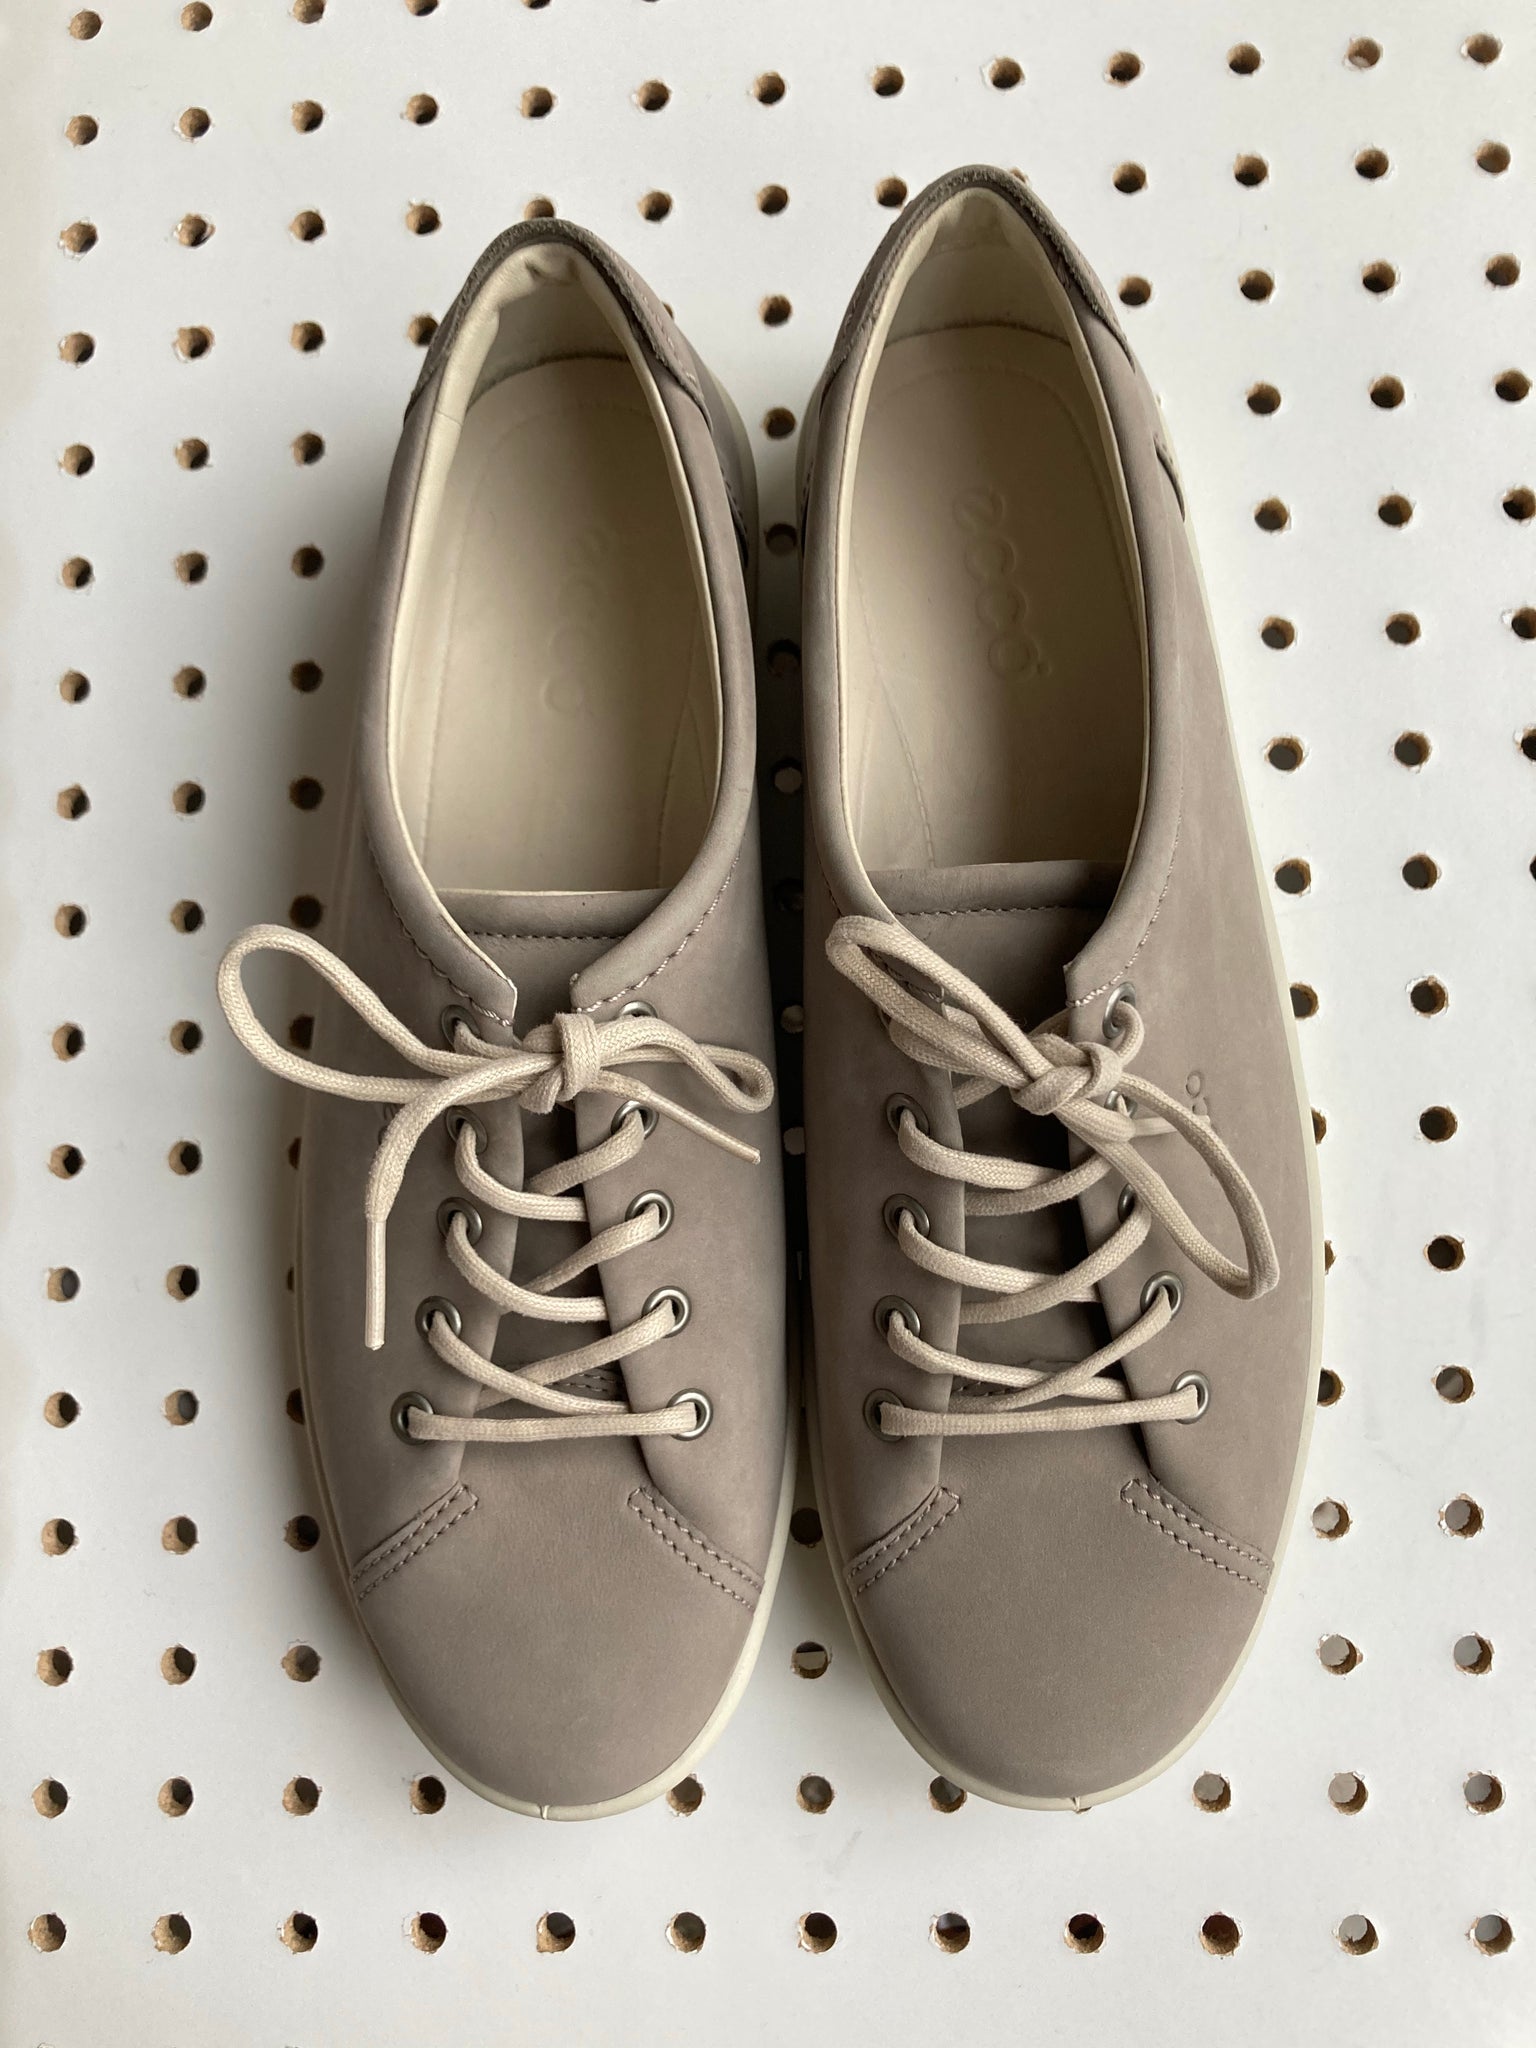 Ecco leather grey lace ups size 42